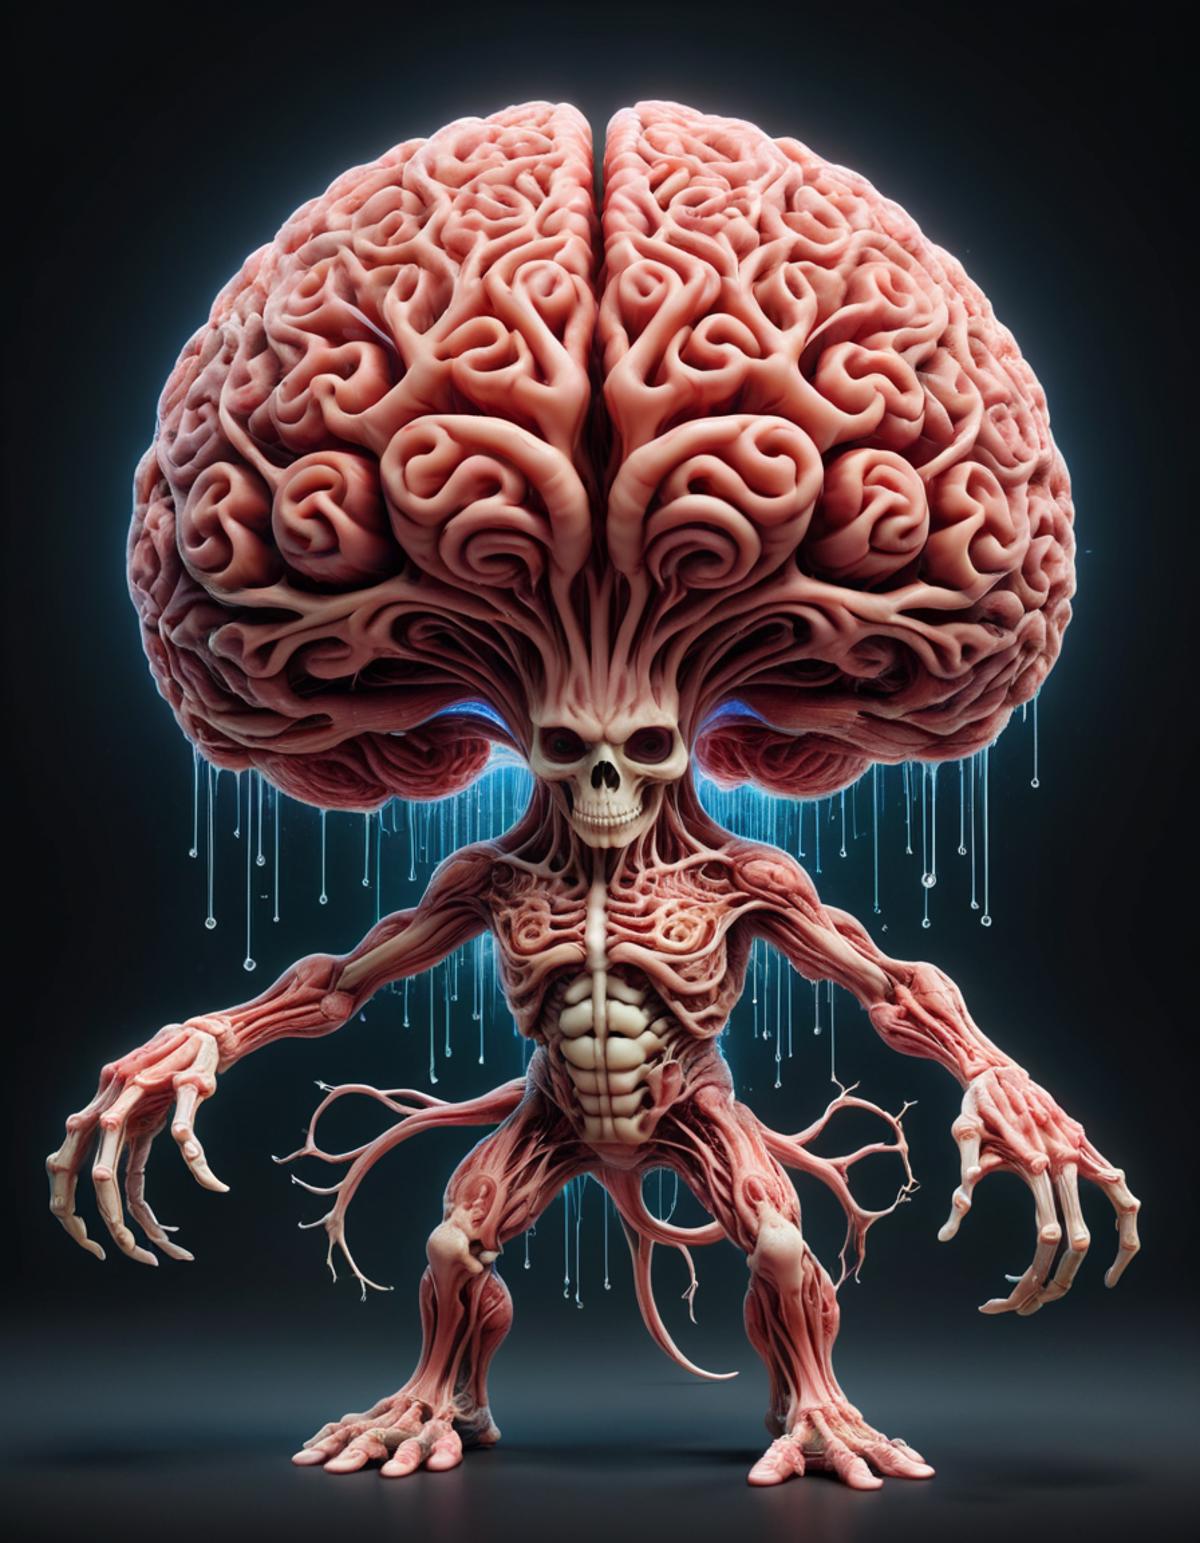 A 3D artistic representation of a skeleton with a large brain and blood dripping from it.